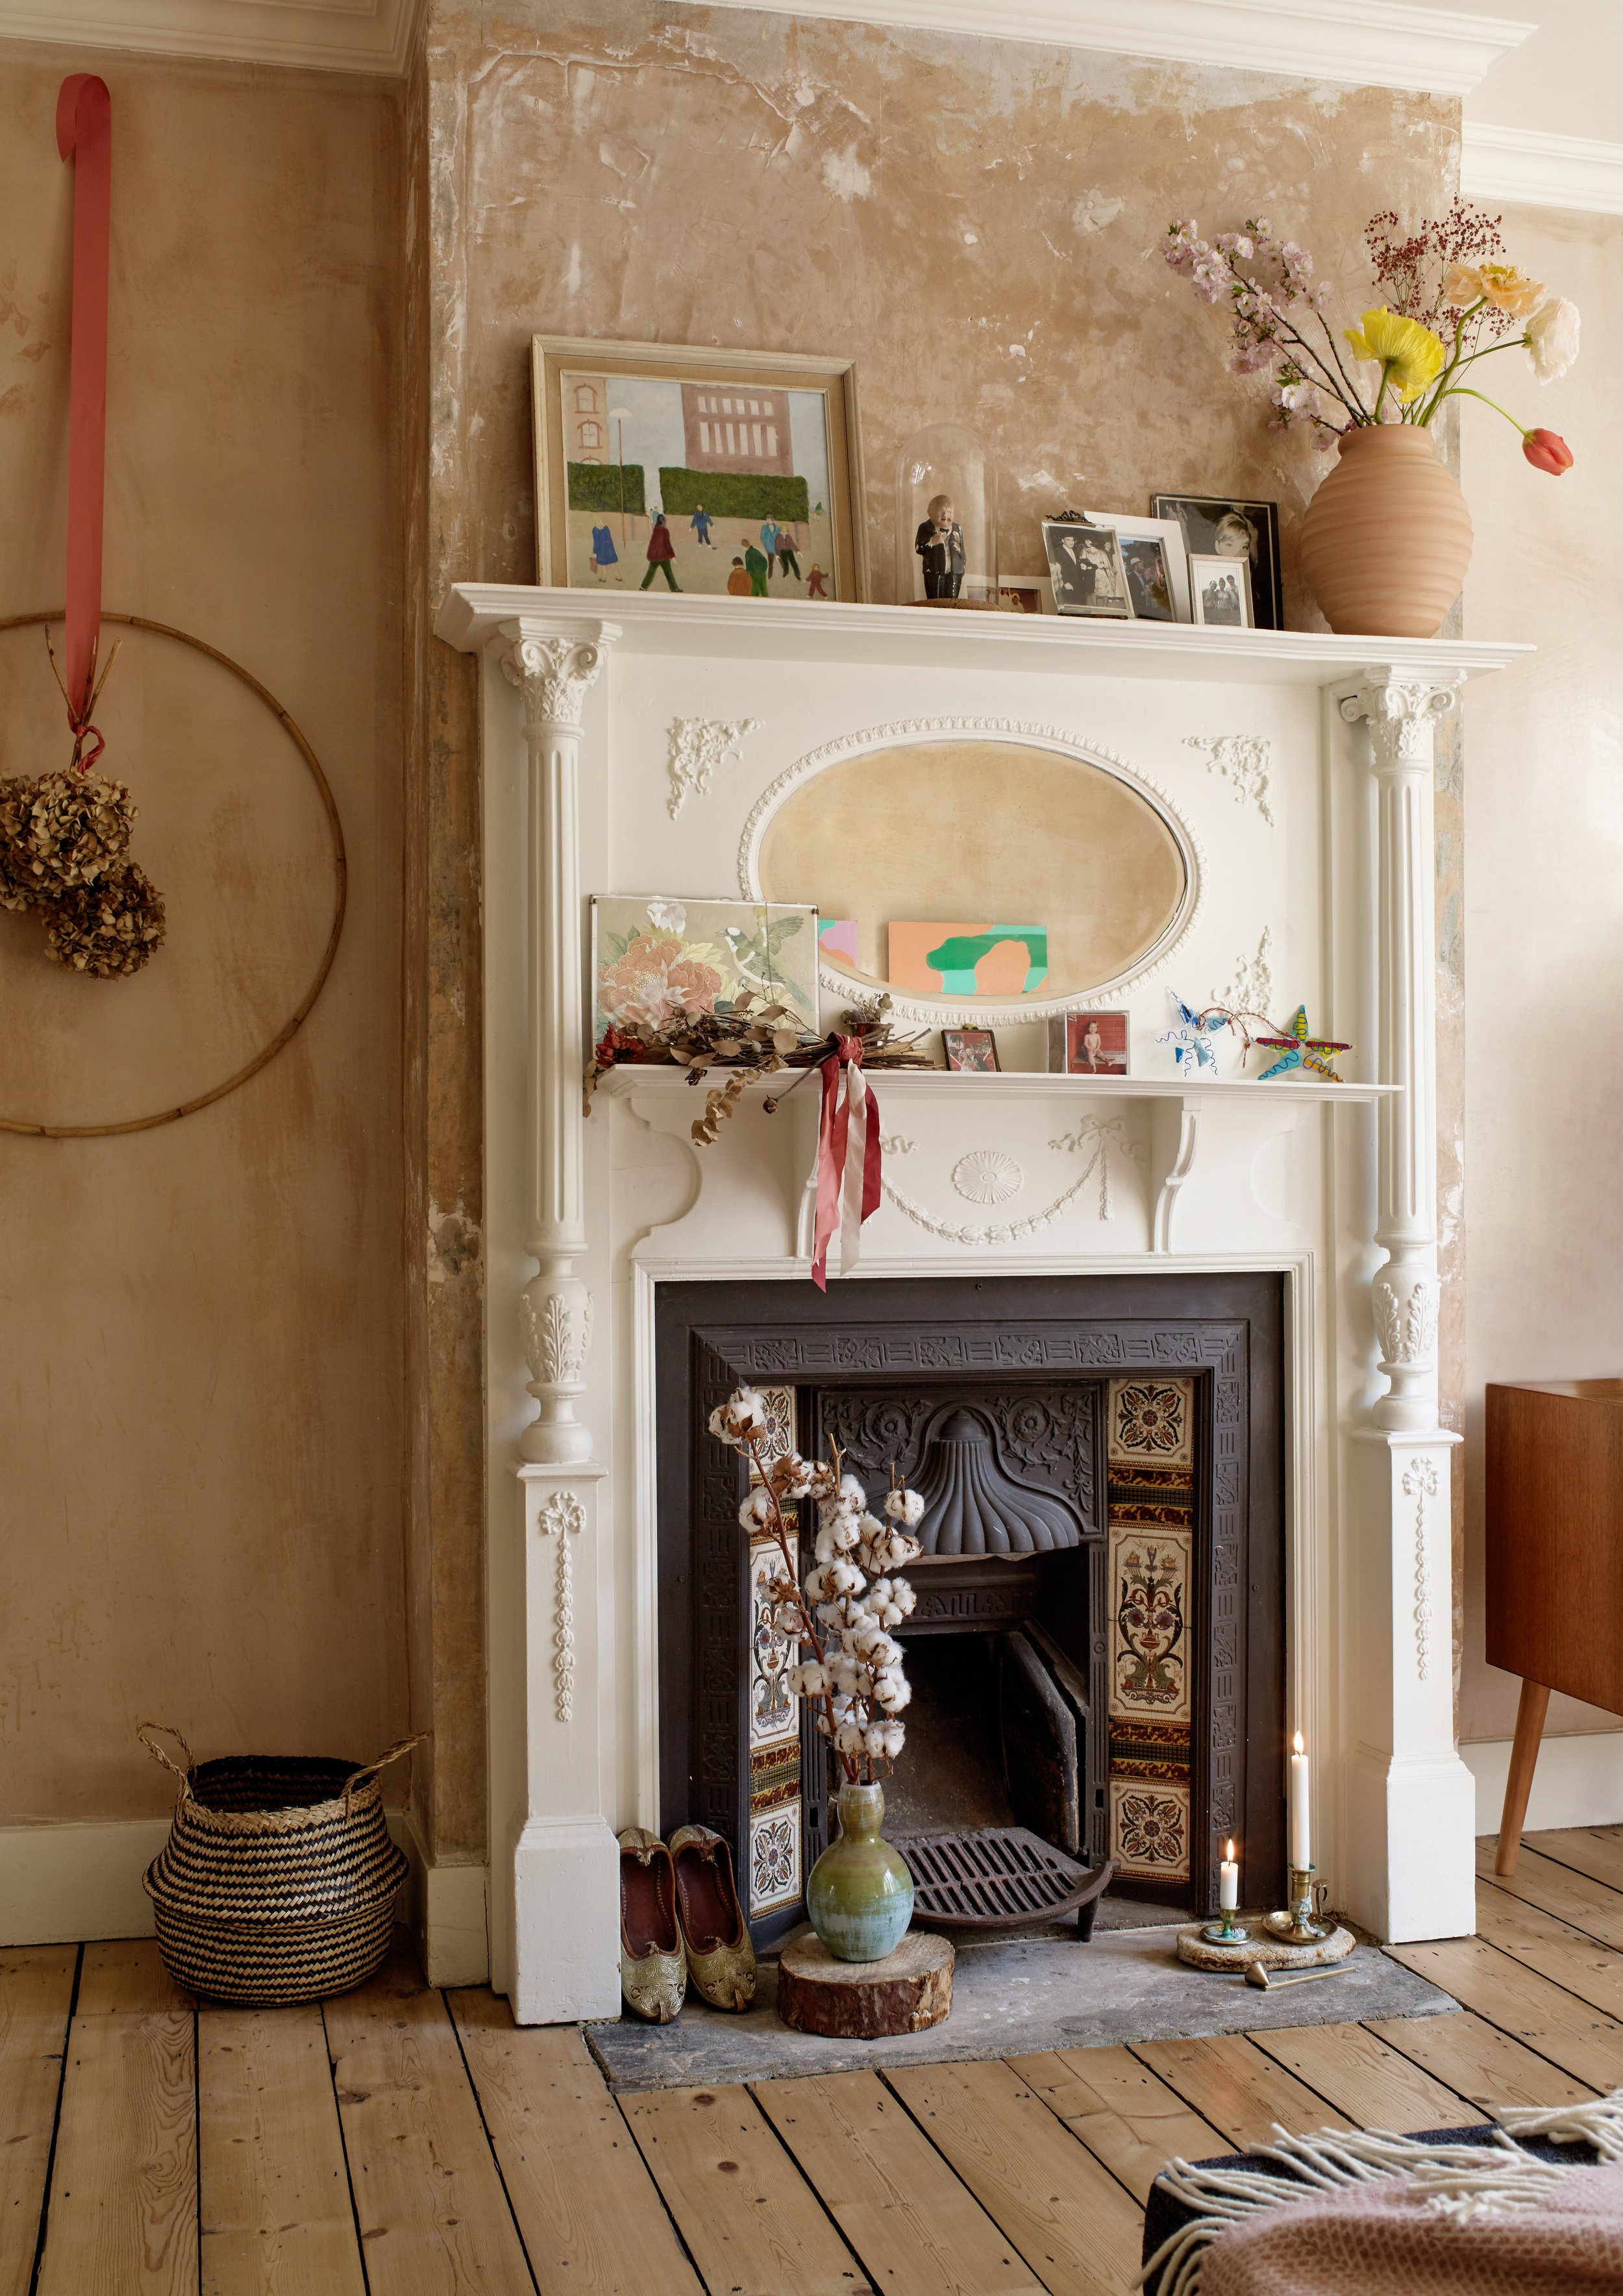 Ornate Victorian fireplace with bare plaster walls